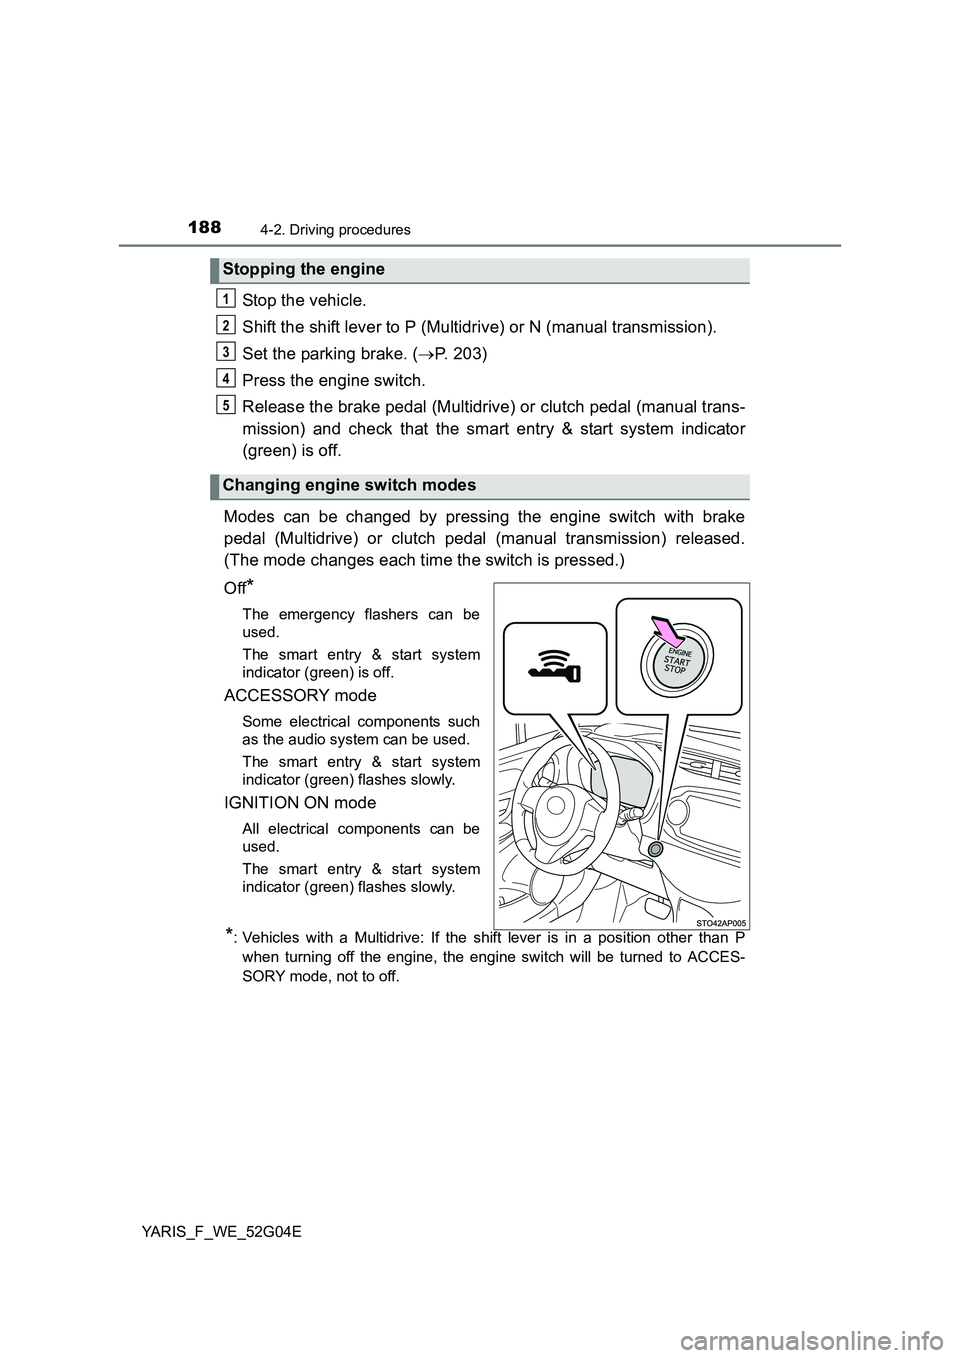 TOYOTA YARIS 2016  Owners Manual 1884-2. Driving procedures
YARIS_F_WE_52G04E
Stop the vehicle. 
Shift the shift lever to P (Multidrive) or N (manual transmission). 
Set the parking brake. ( P. 203) 
Press the engine switch. 
Rele